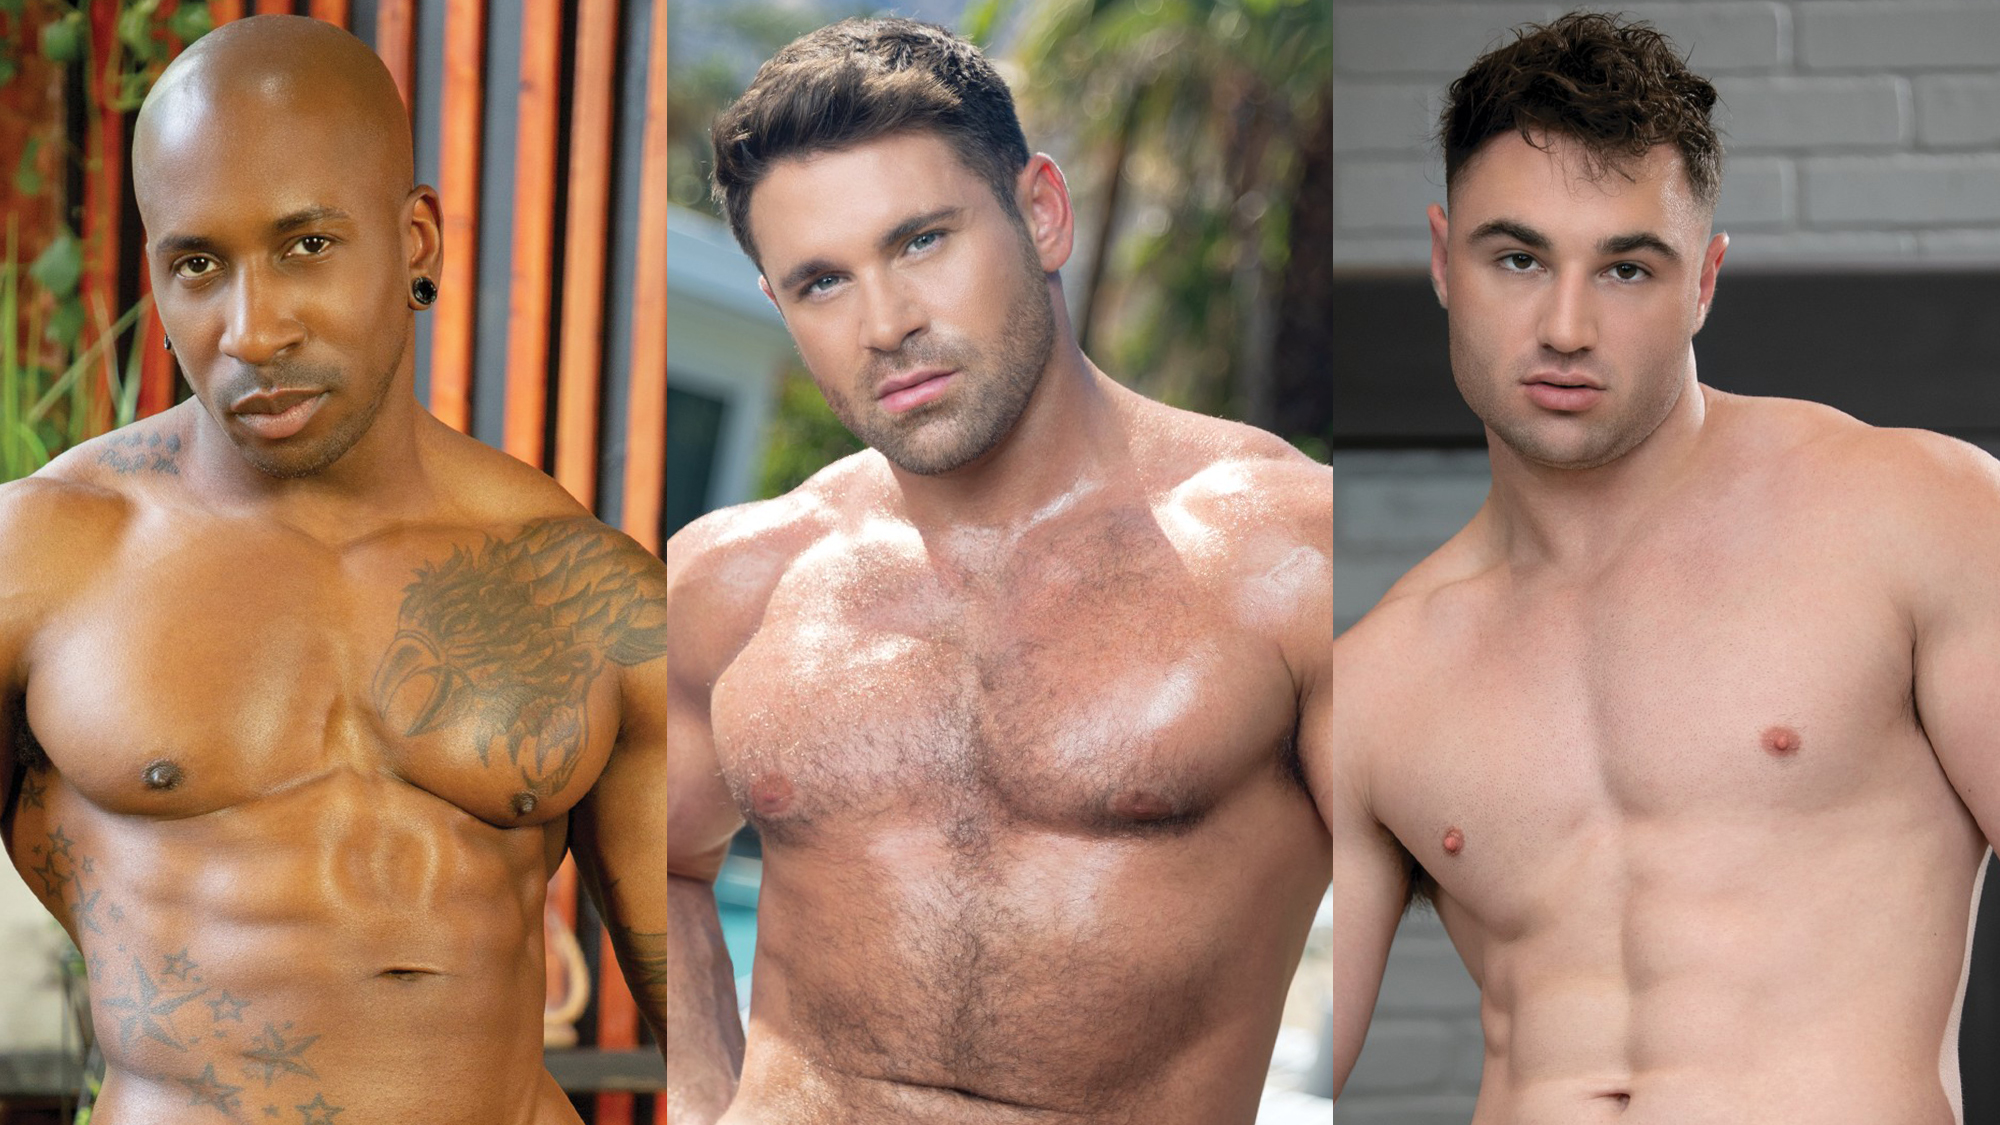 Gay Porn Stars - Tell Us Who Your Favorite Gay Porn Stars Are - TheSword.com